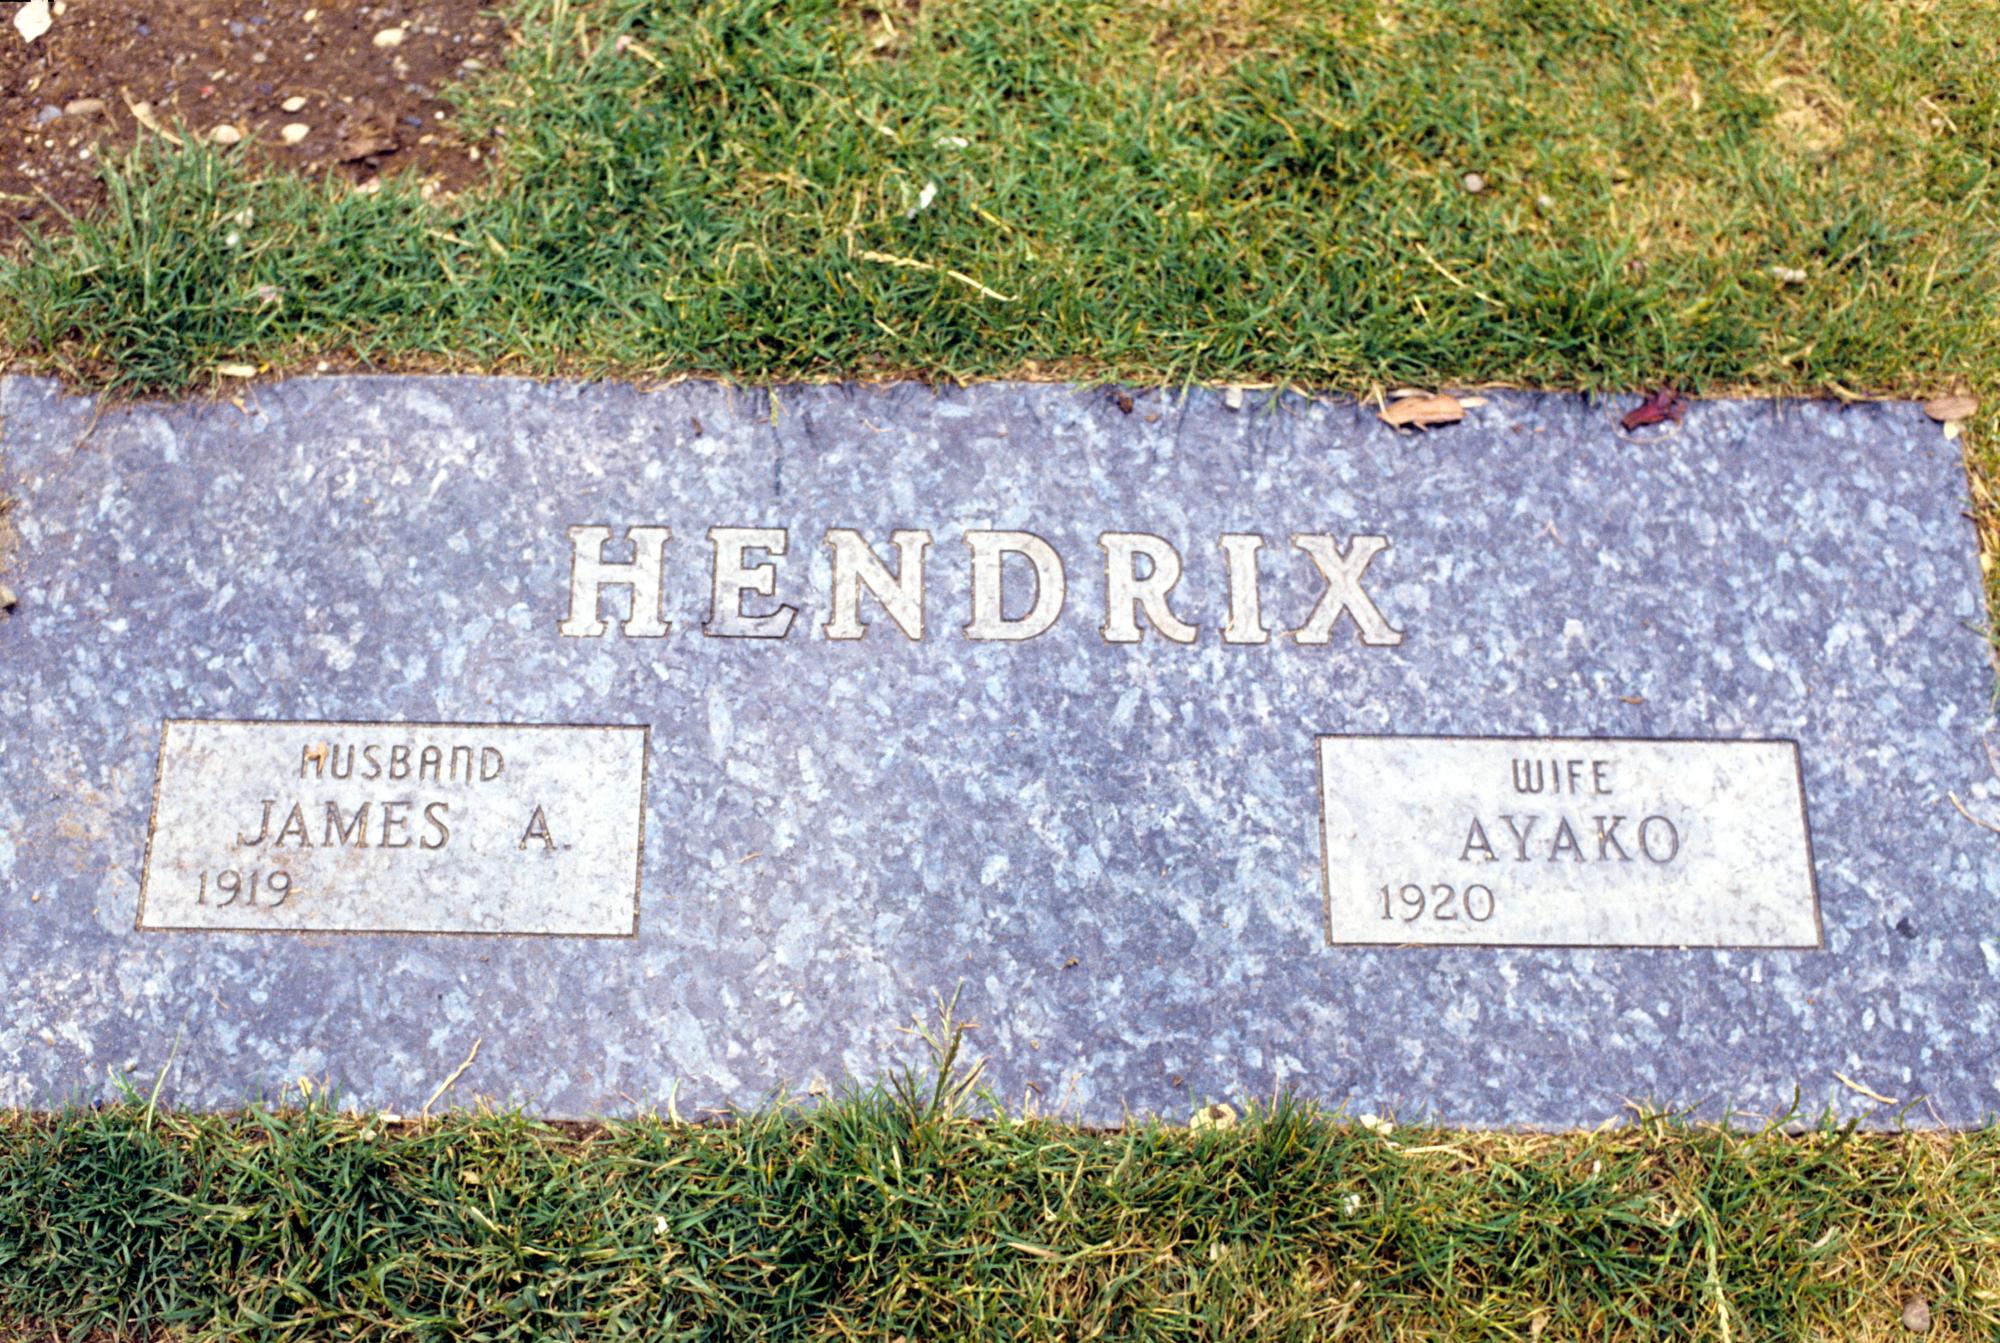 Seattle (1995) - Hendrix Tombstome